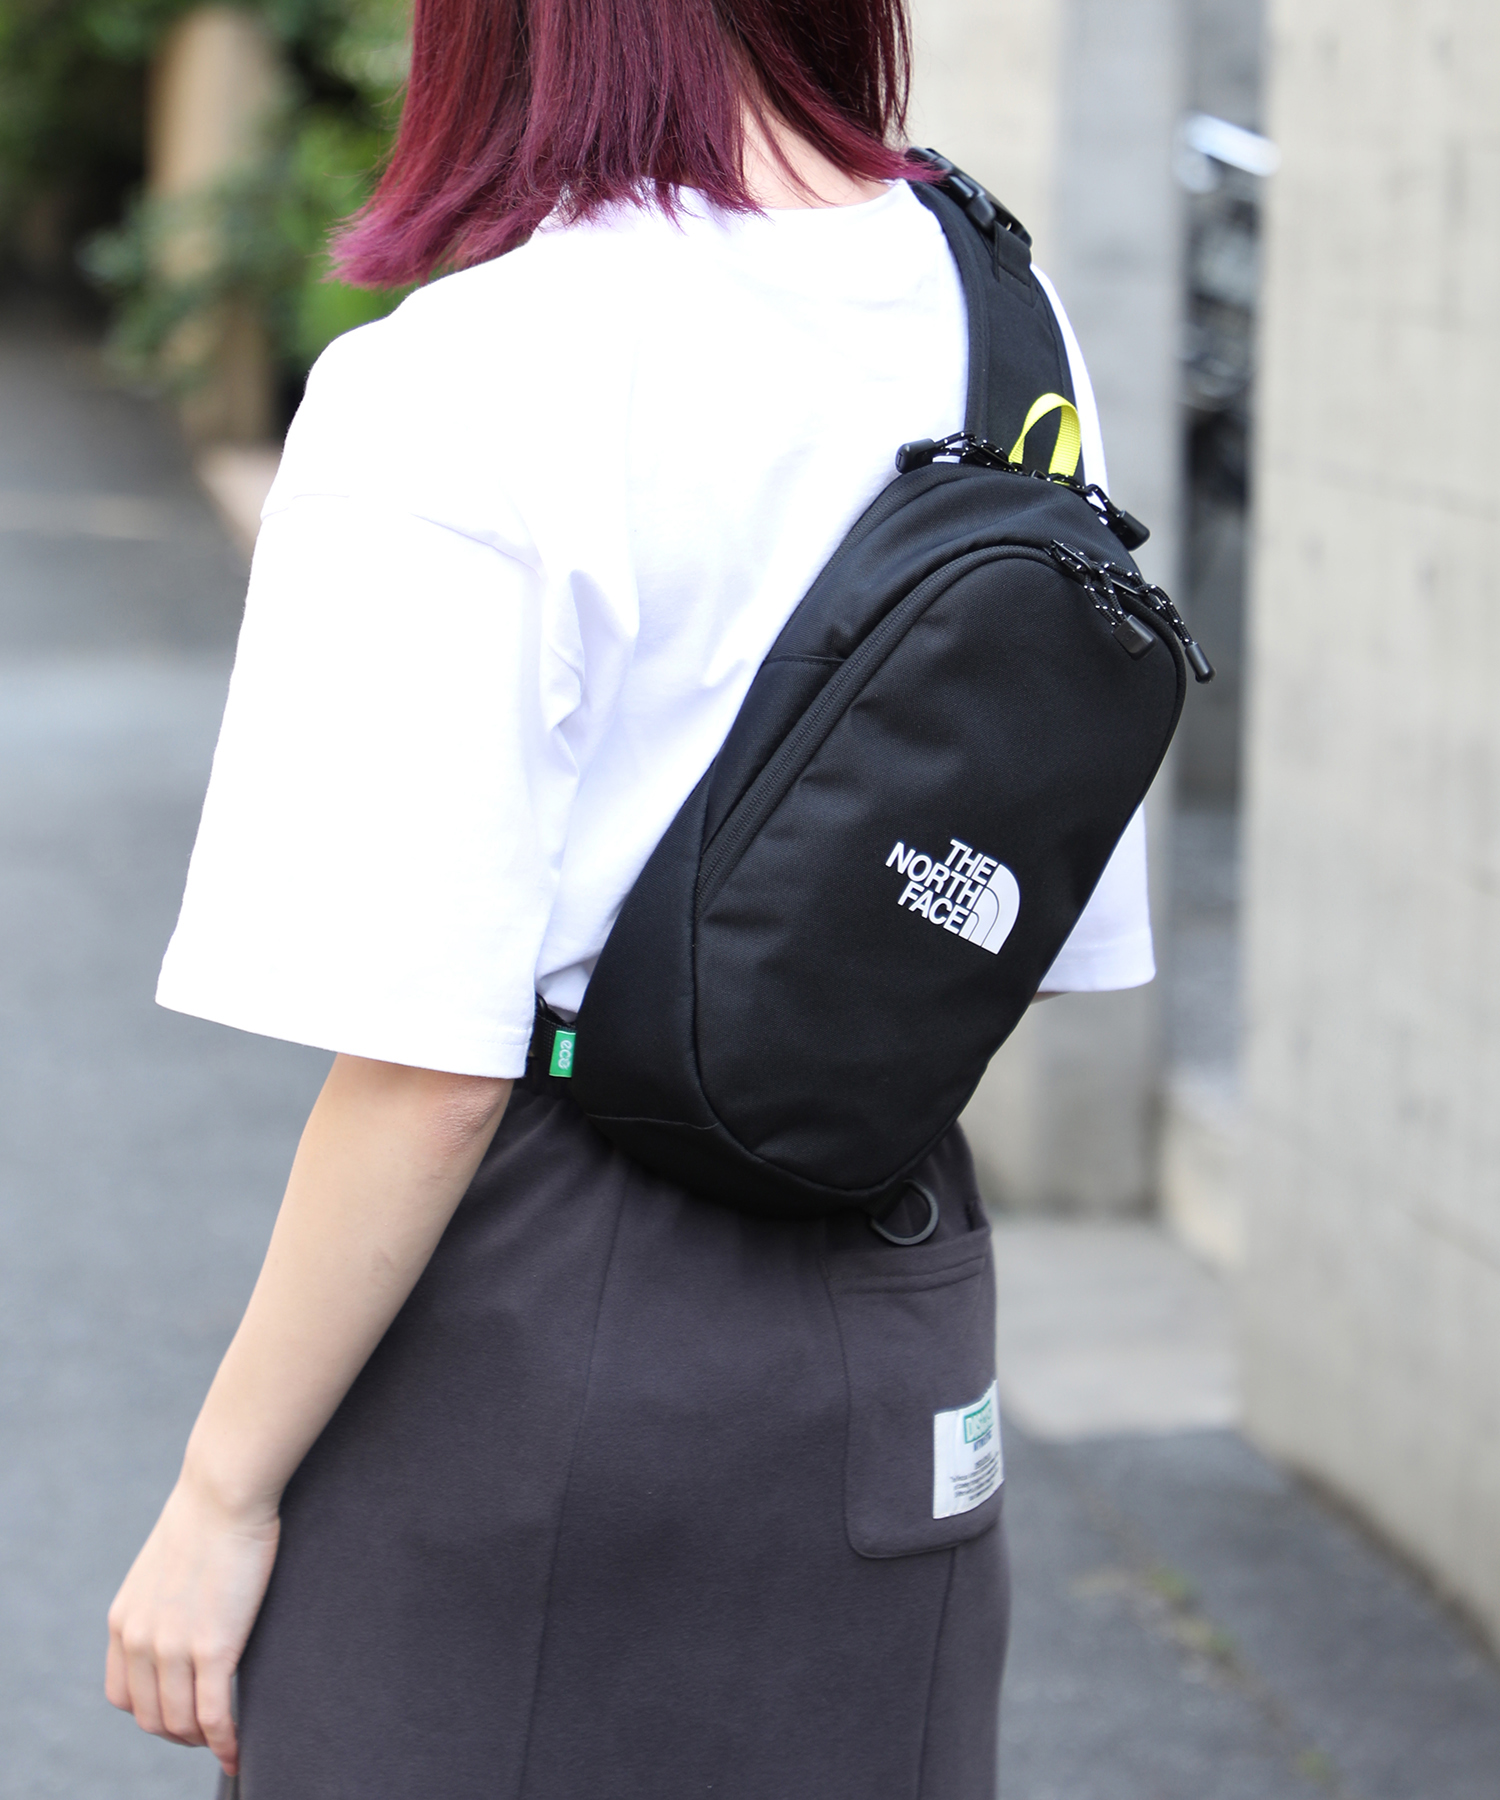 THE NORTH FACE / ザ・ノースフェイス】Simple Sports Oneway ...